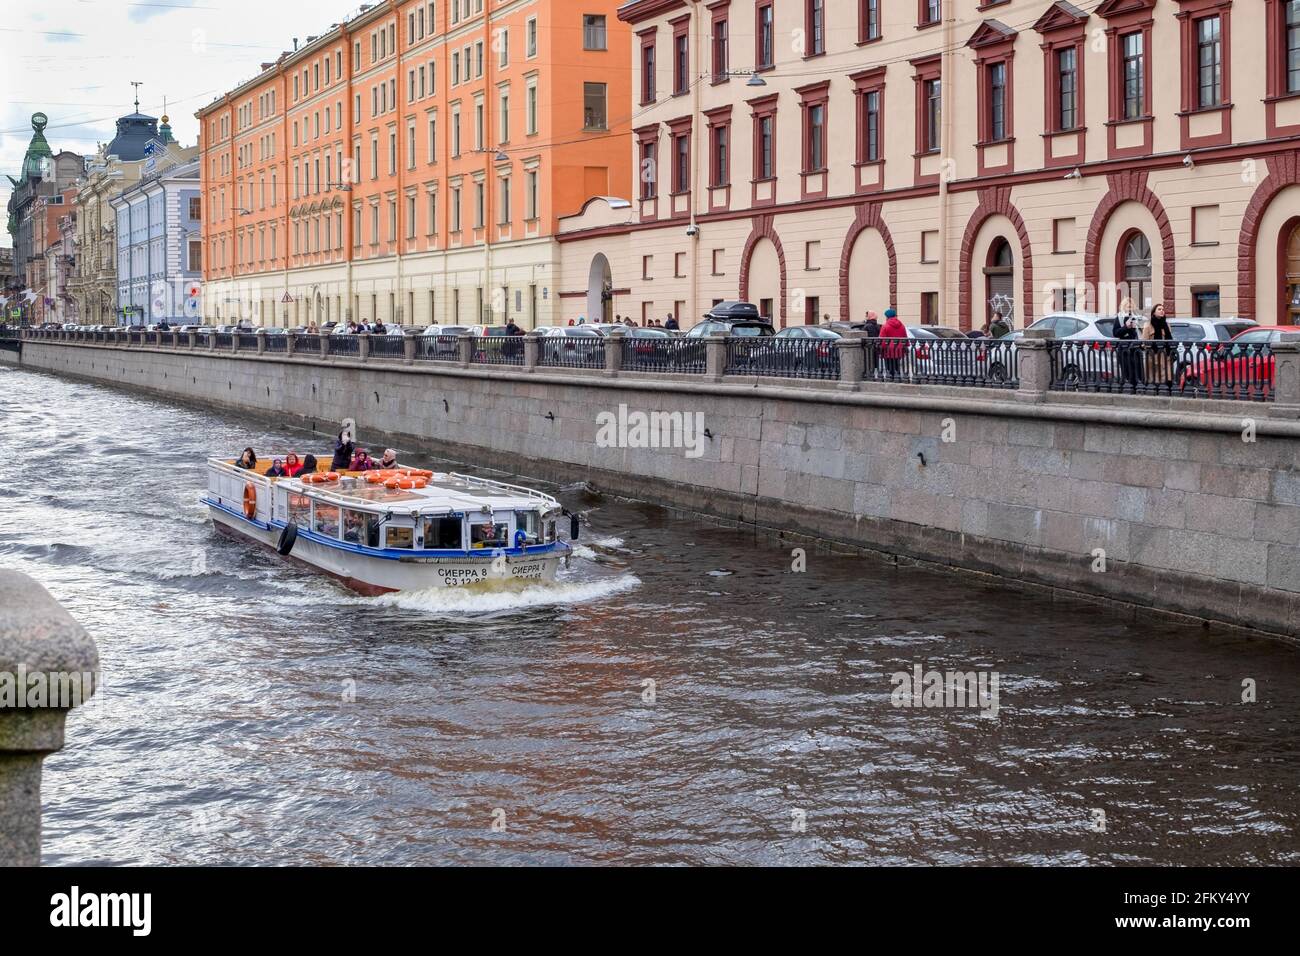 A pleasure boat sails along the Griboyedov Canal past historic buildings Stock Photo